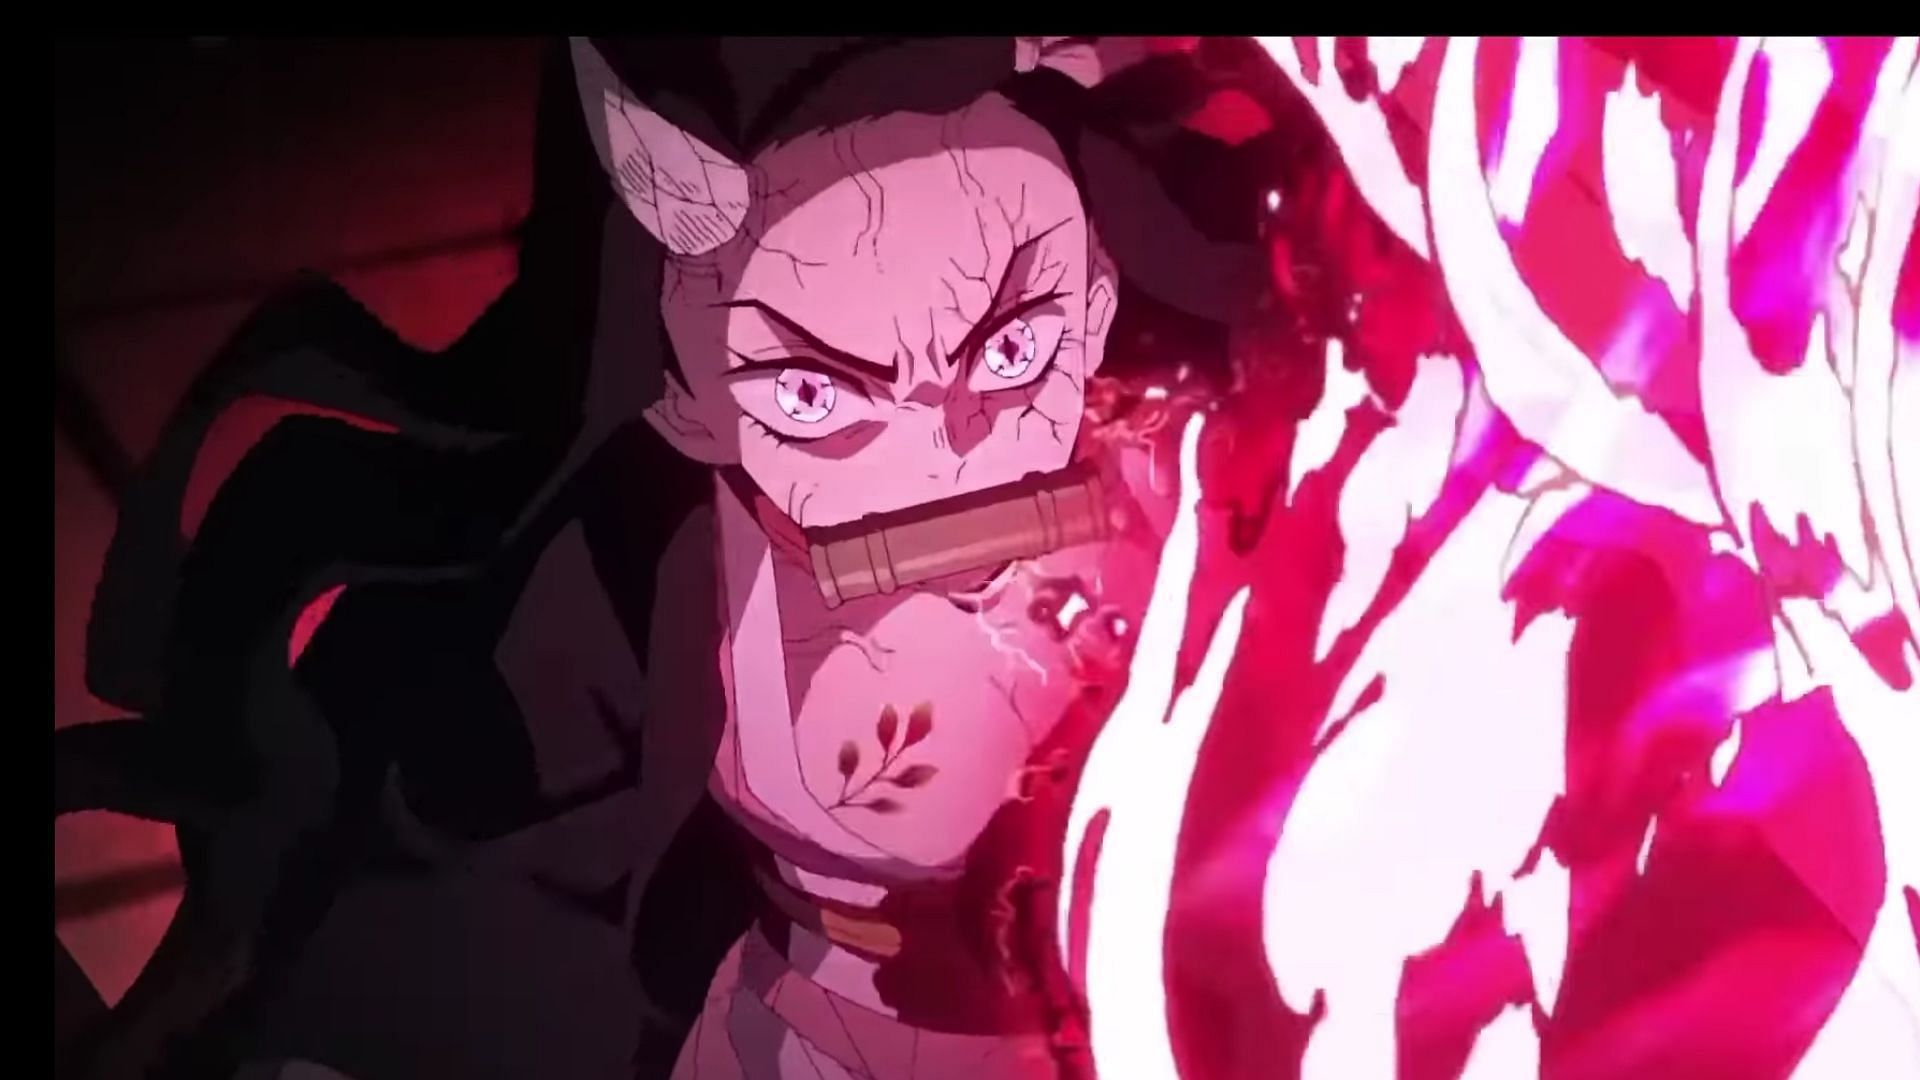 MangaThrill - In the heart-pounding climax of Demon Slayer's third